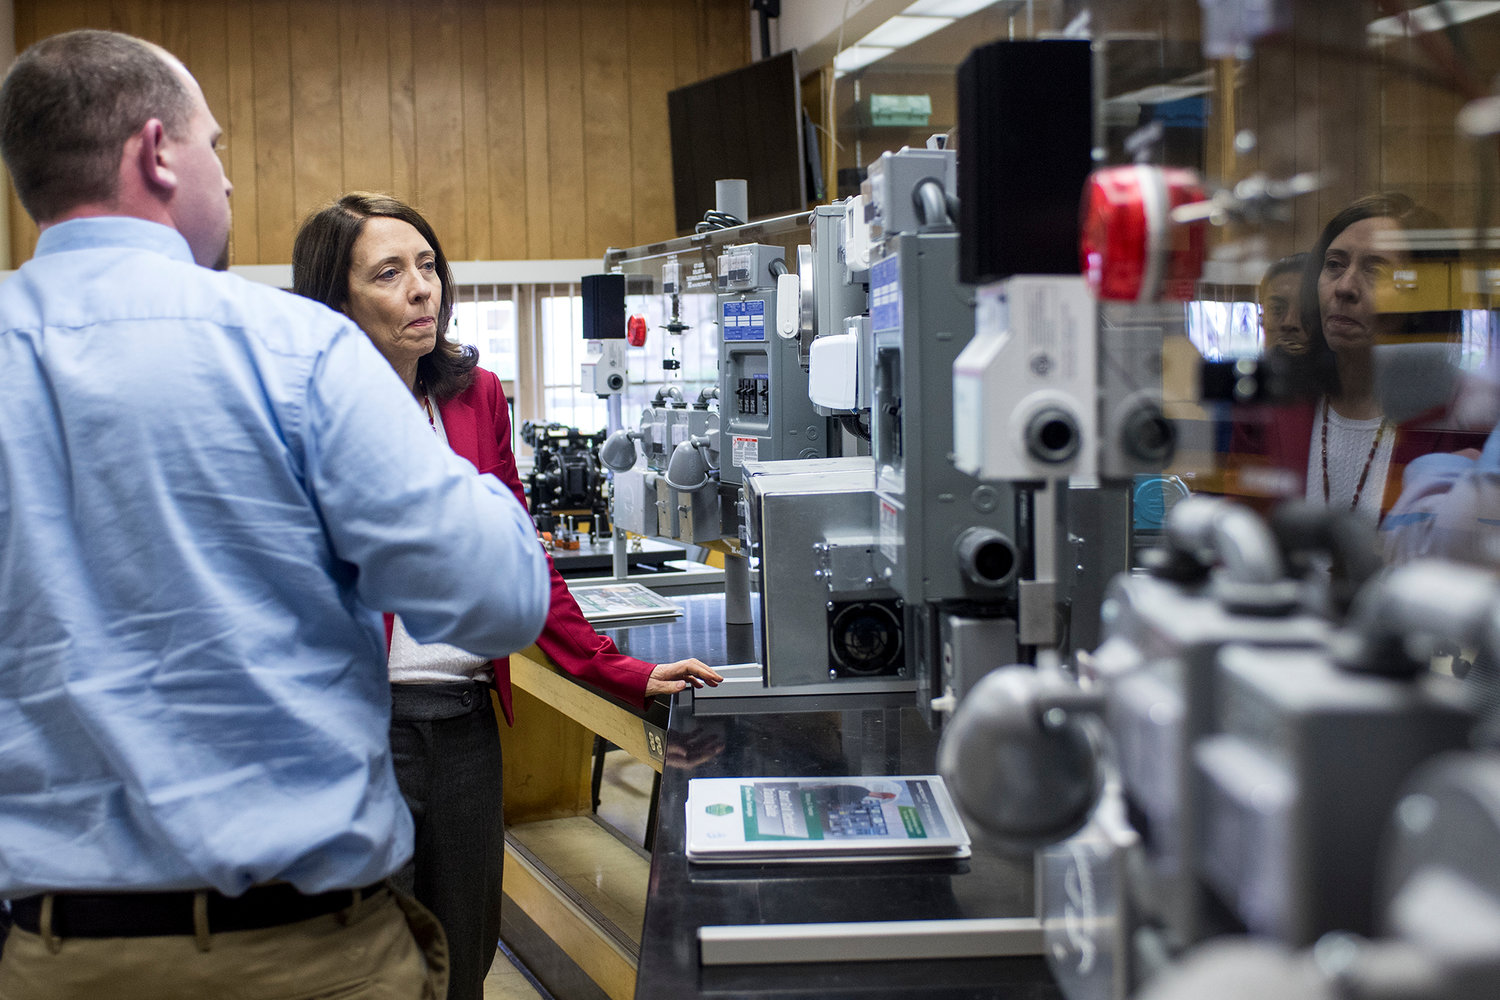 U.S. Sen. Maria Cantwell, D-Washington, tours an electric engineering classroom in Kemp Hall at Centralia College on Wednesday afternoon.